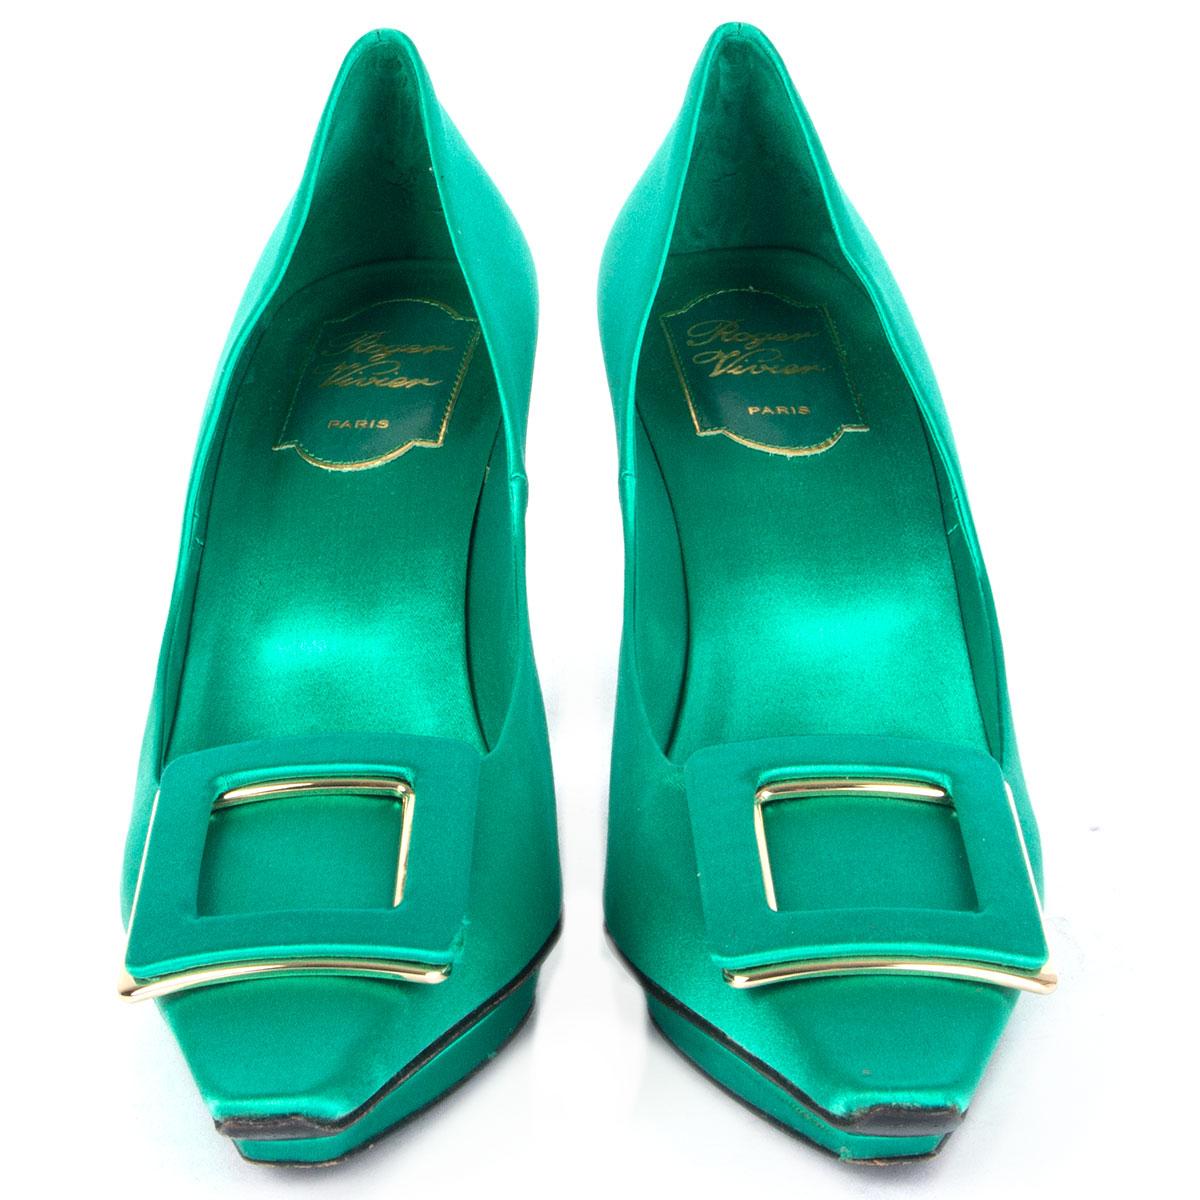 100% authentic Roger Vivier platform pointed-toe pumps in mint green silk satin featuring signature buckle detail. Have been worn with a small scratch on the right shoes buckle. Overall in very good condition. 

Measurements
Imprinted Size	38
Shoe